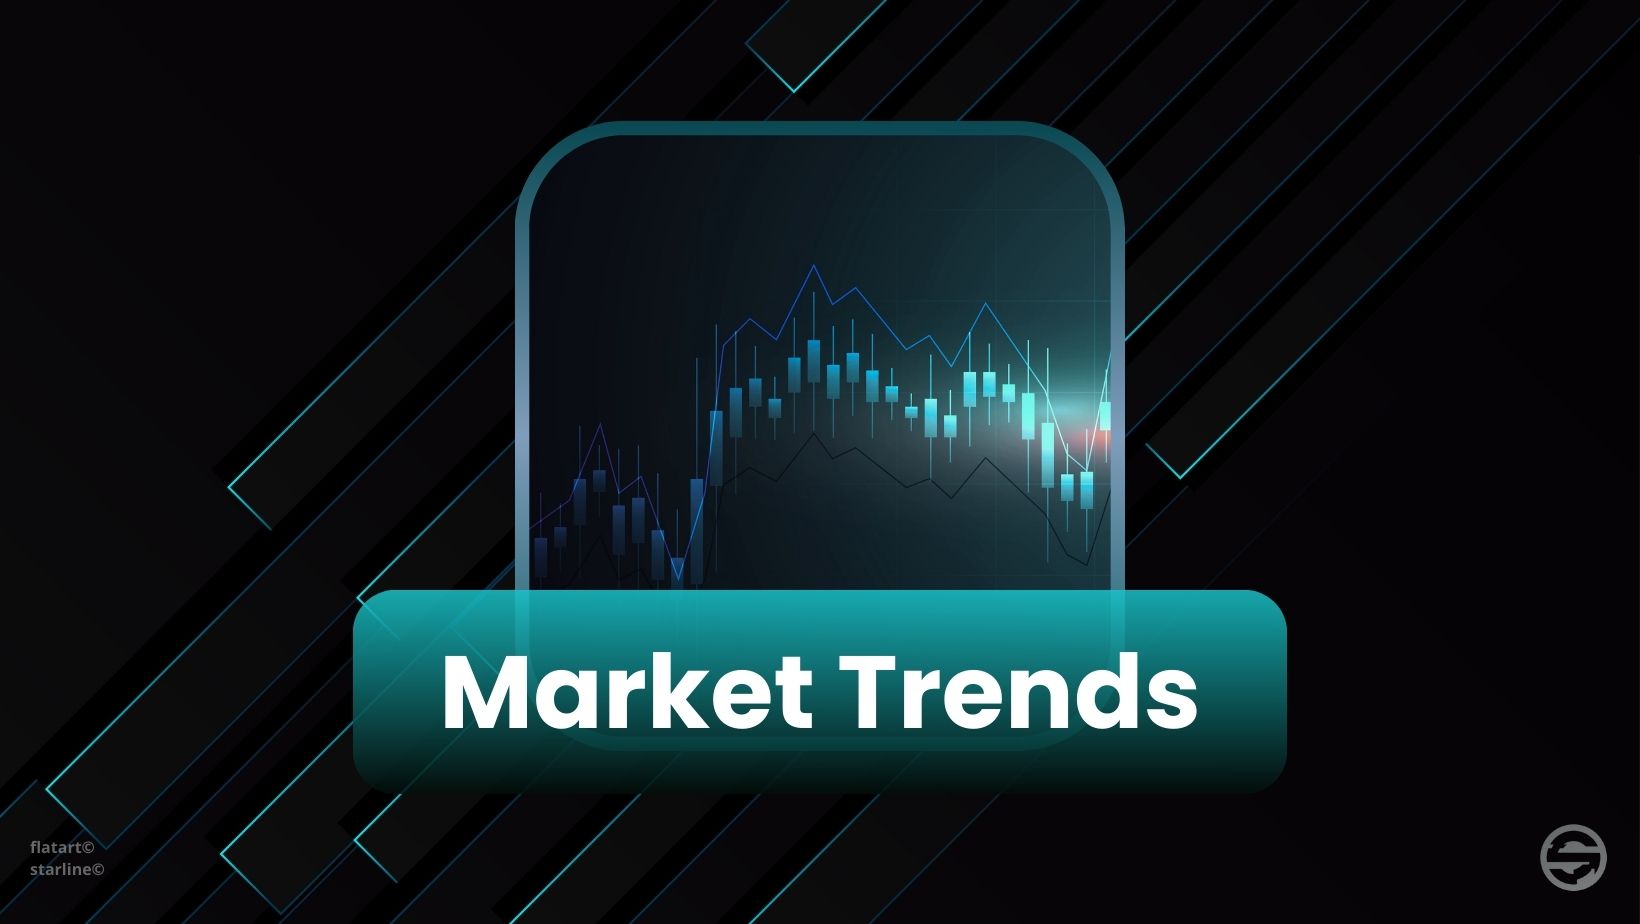 Market trends: uptrend, downtrend and range